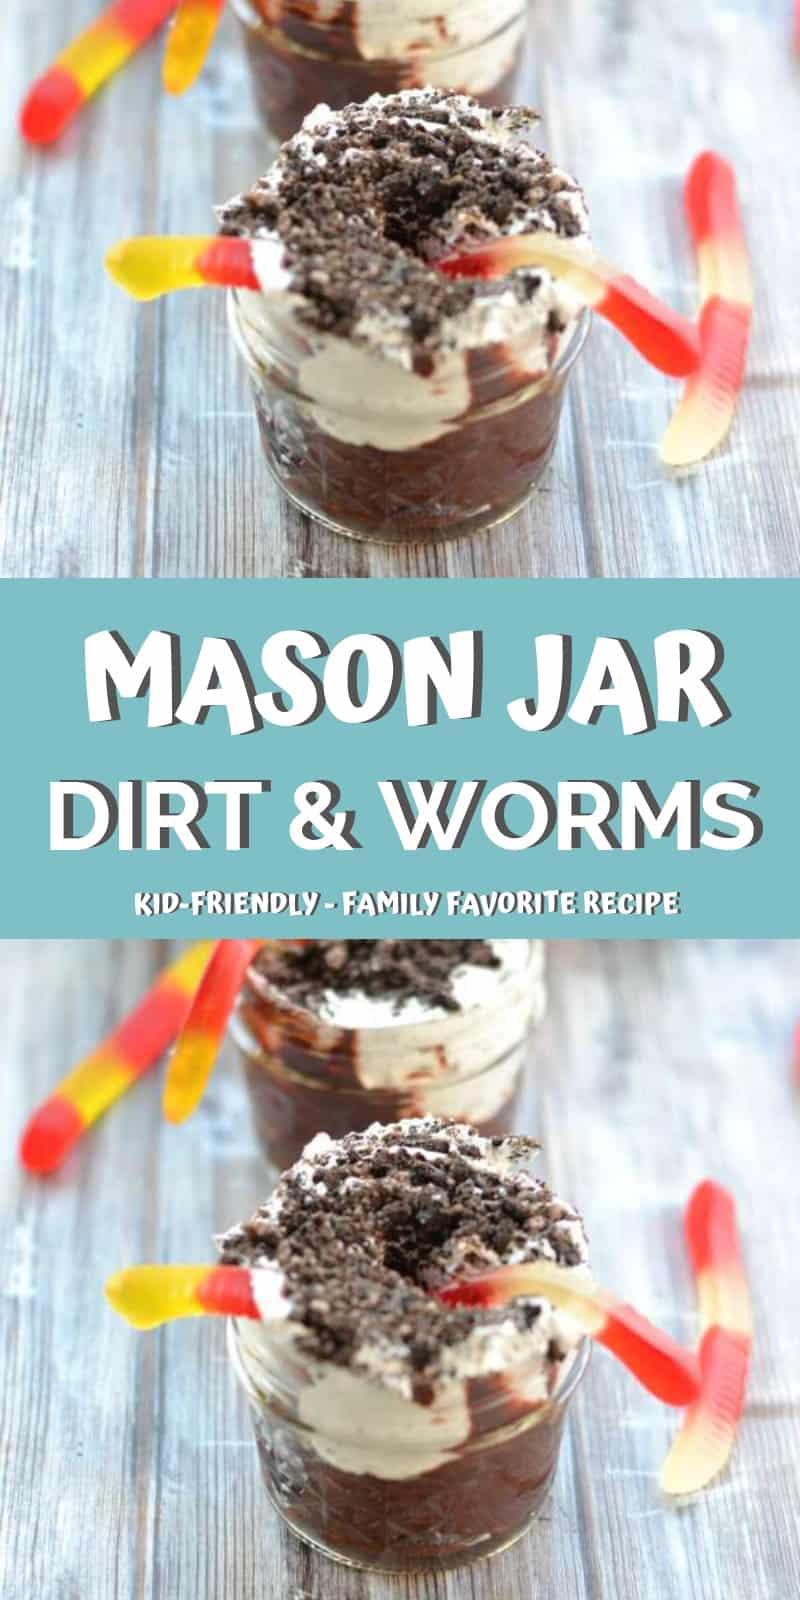 This mason jar dirt and worms recipe is AMAZING! It's the perfect treat for kids after school or on a warm summer day. I don't know about your kids, but mine love these!